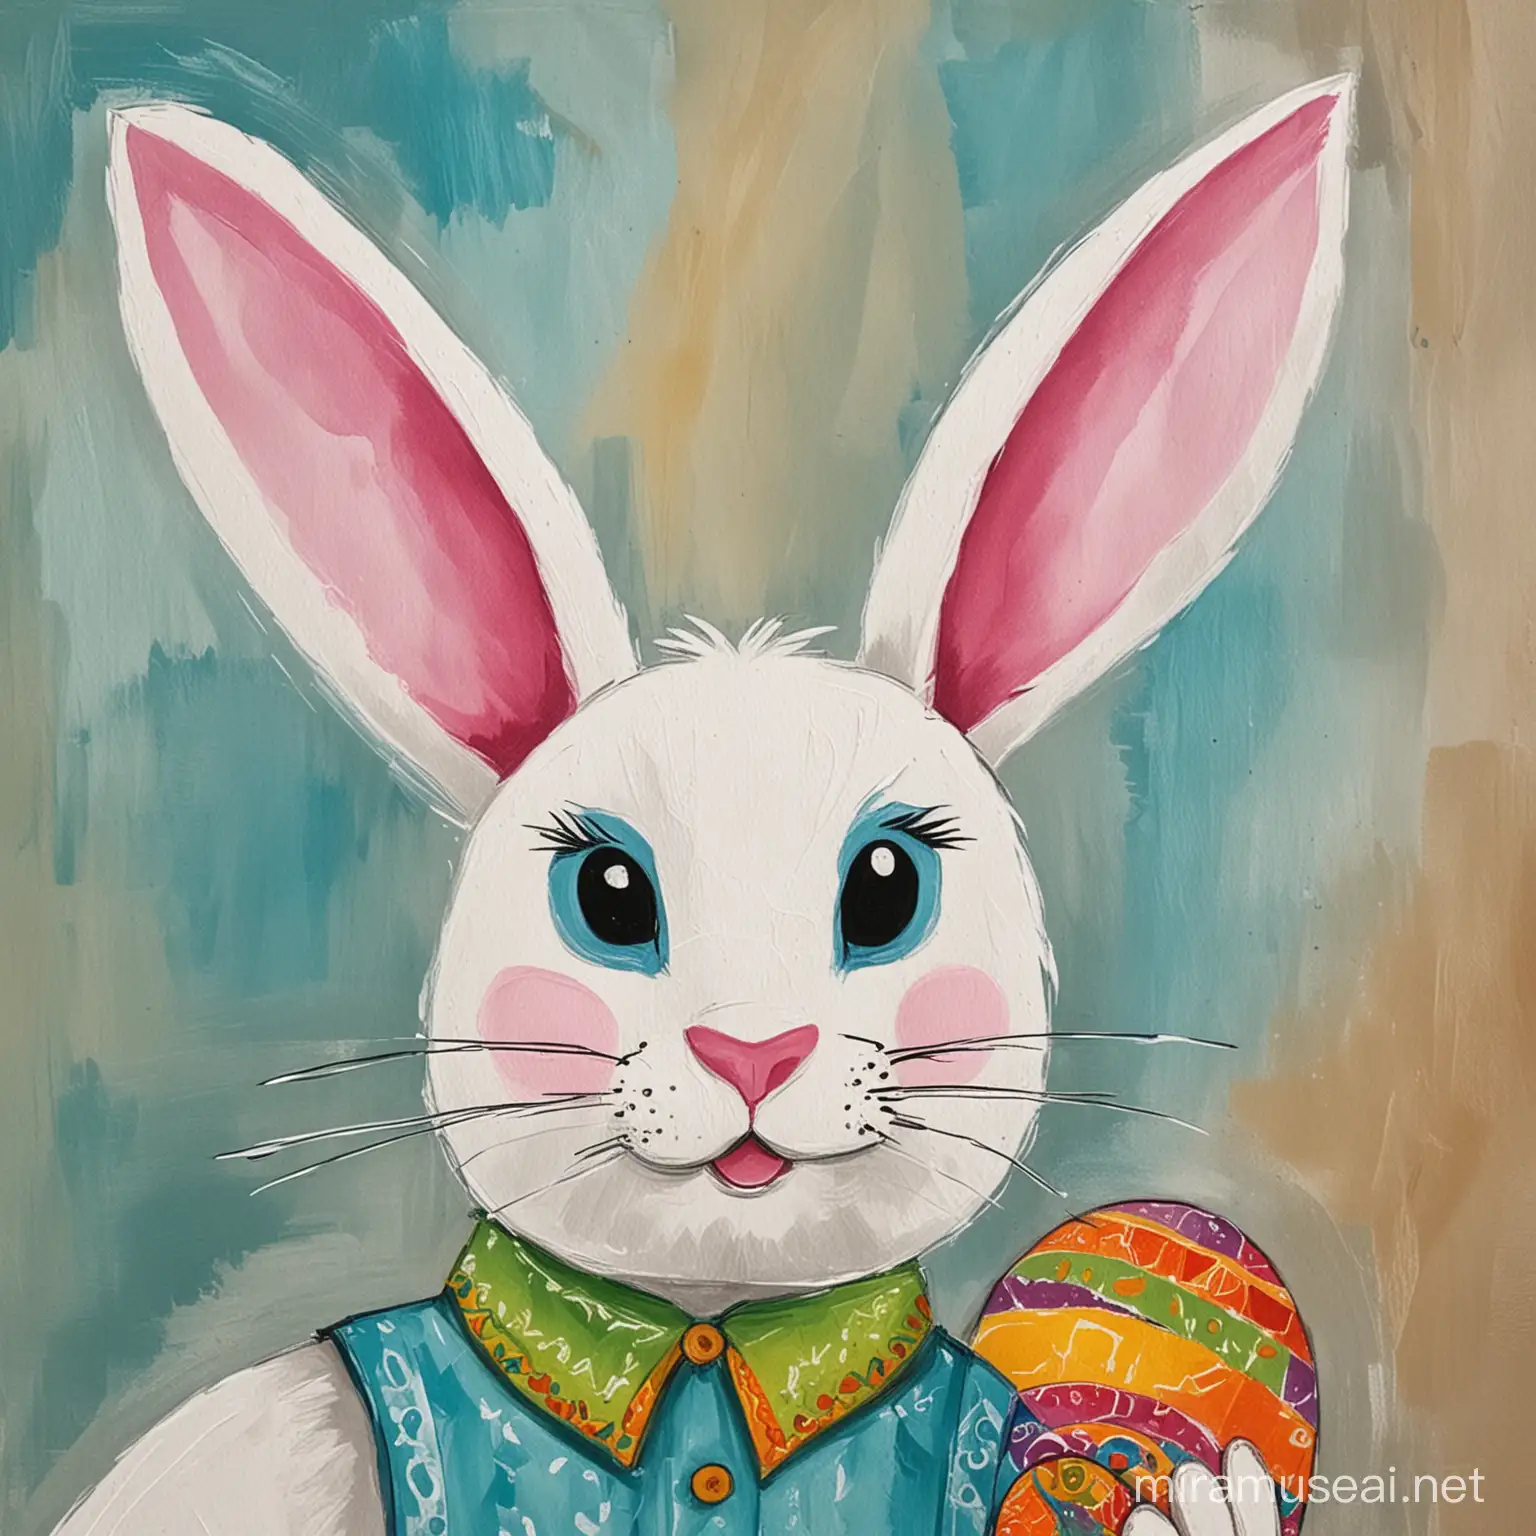 Colorful Easter Bunny Painting by 11YearOld PicassoInspired Artist